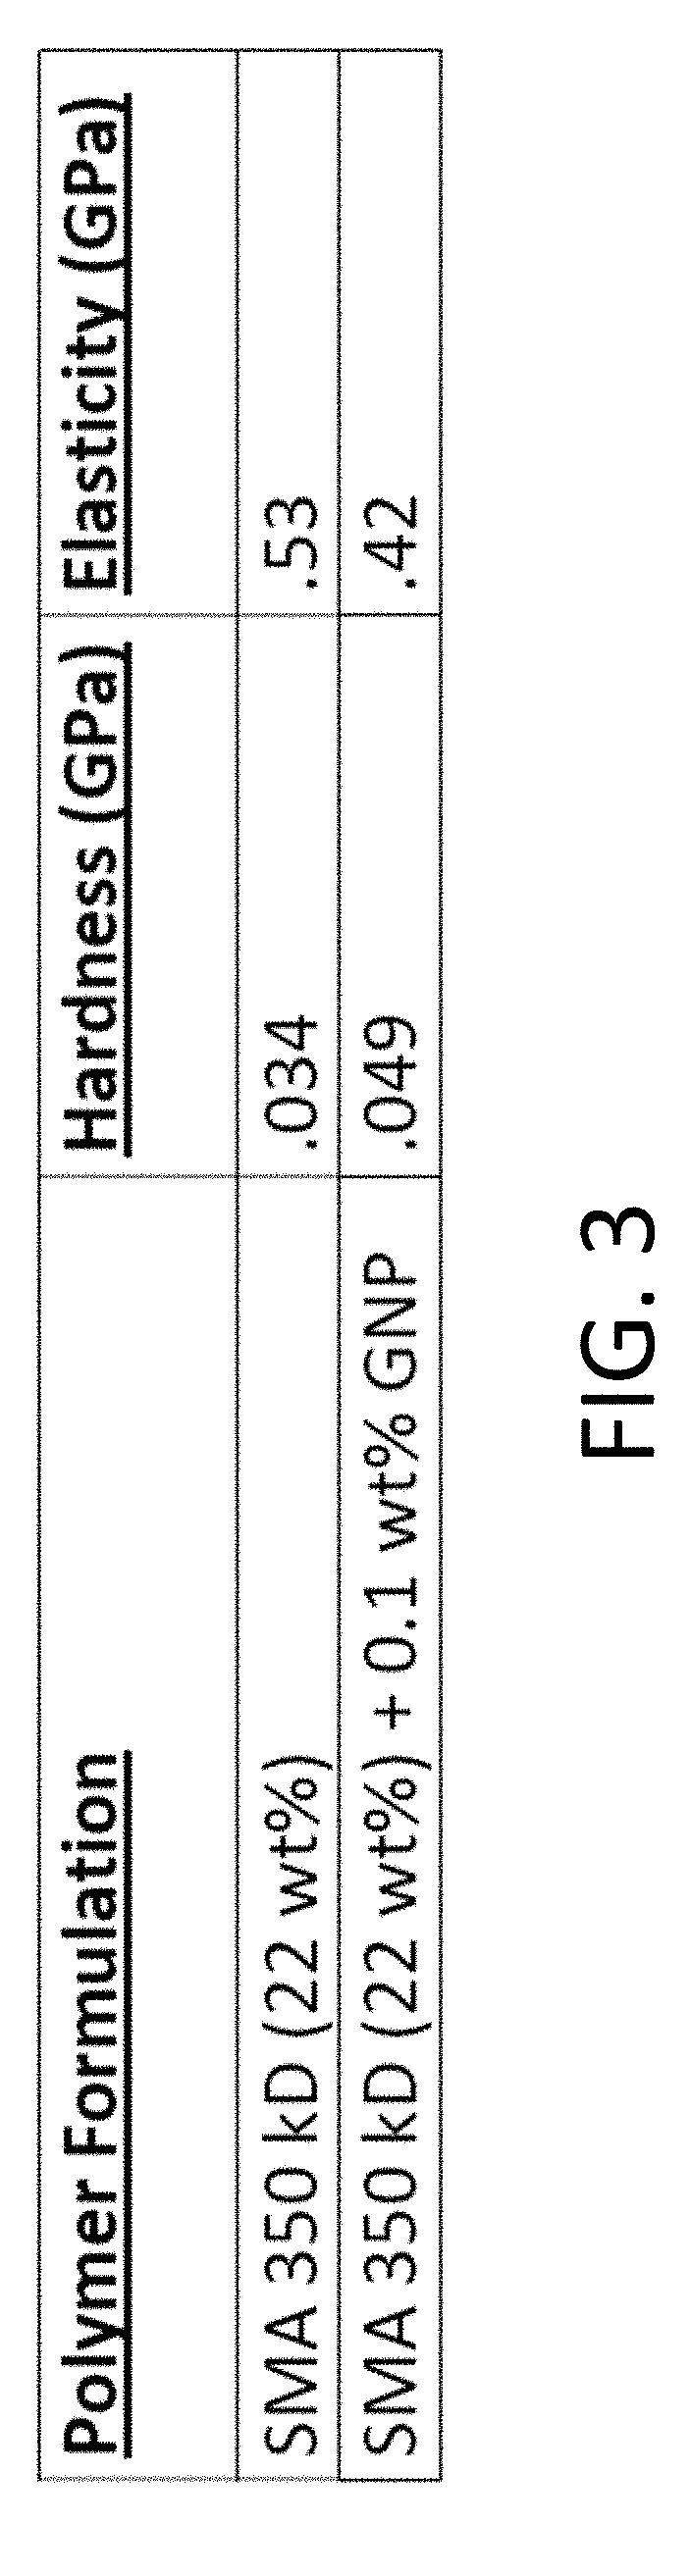 Carbon-based compositions useful for occlusive medical devices and methods of making and using them